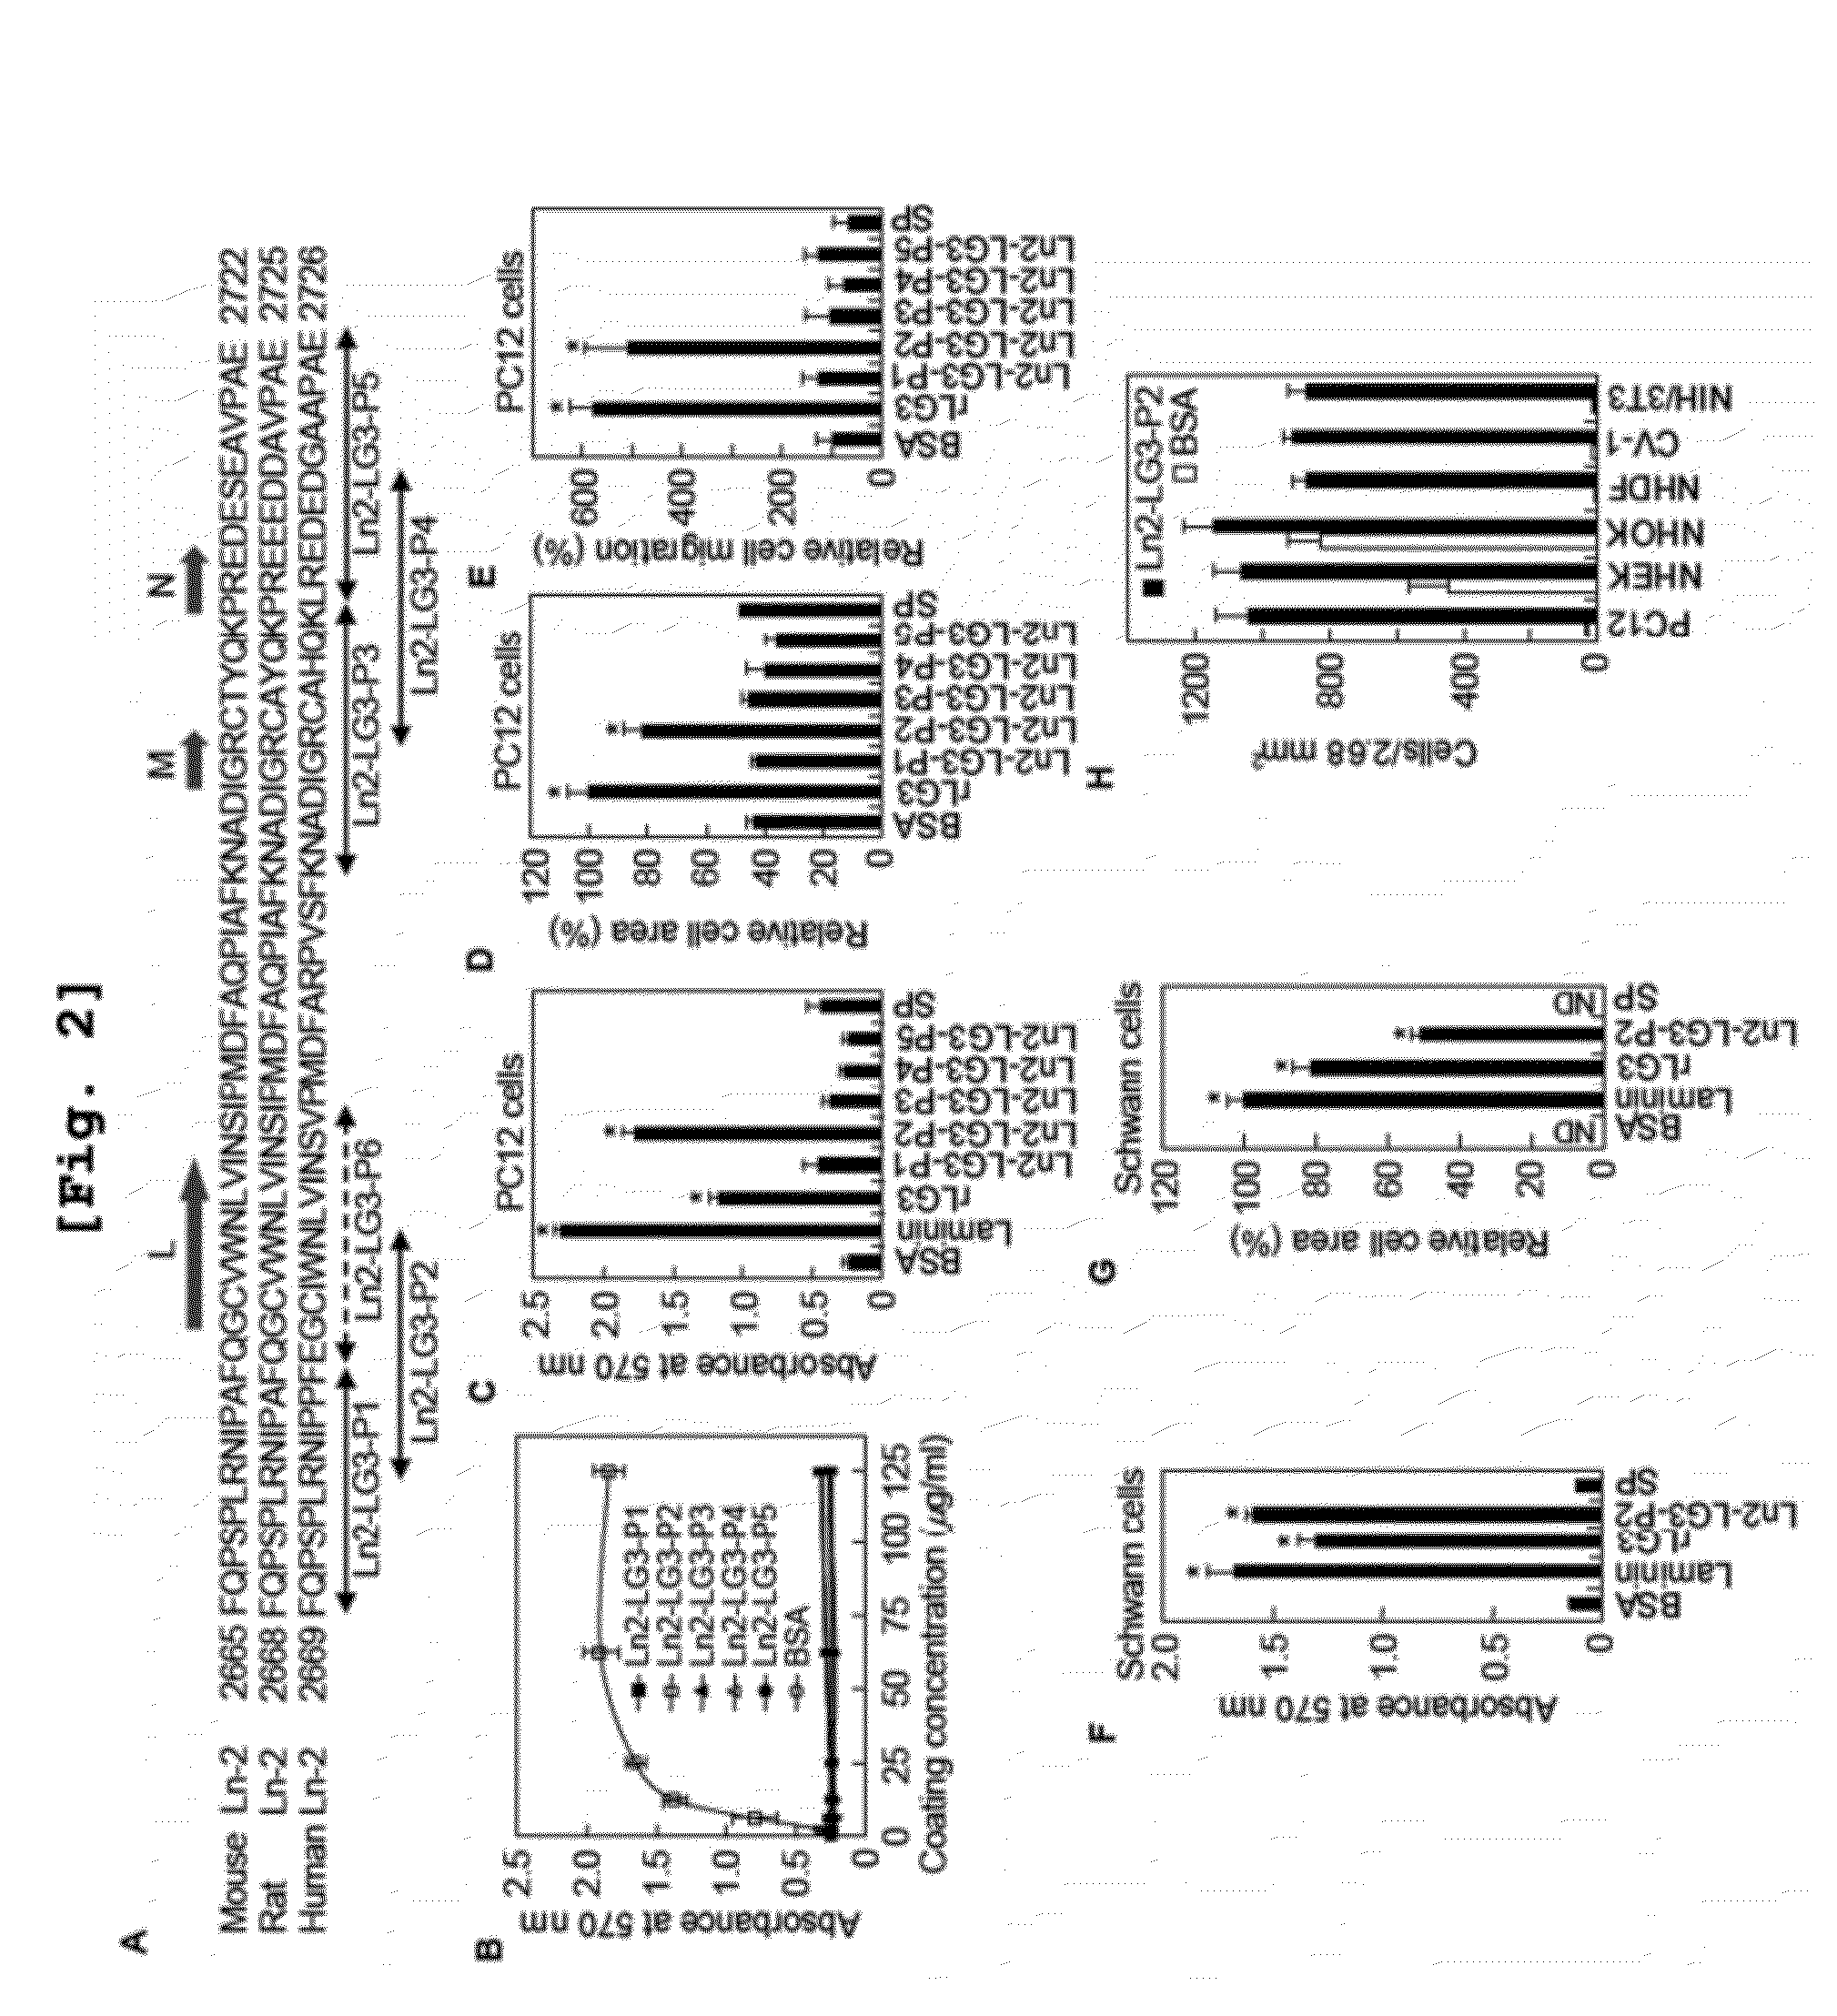 Human laminin alpha2 chain lg3 domain and active peptides promoting cell adhesion, spreading, migration, and neurite outgrowth